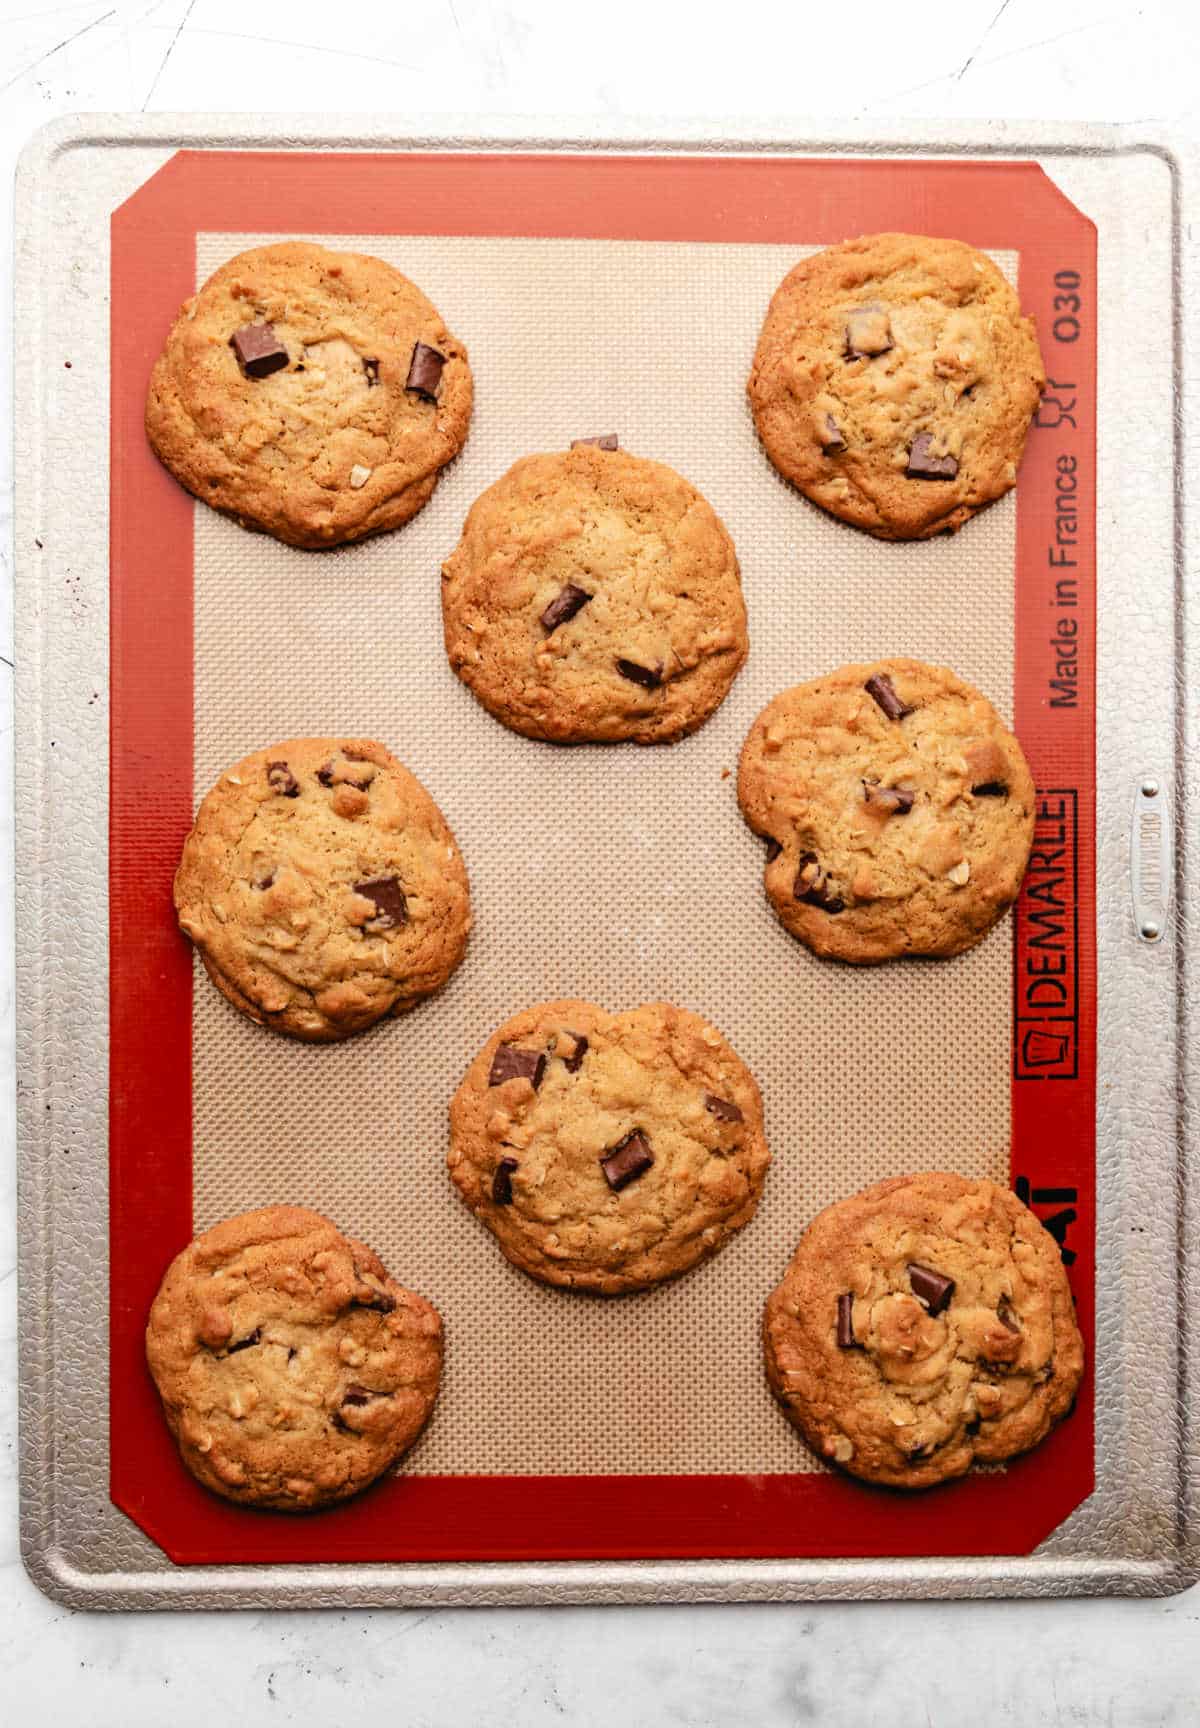 Baked chick-fil-a chocolate chunk cookies on a baking sheet. 